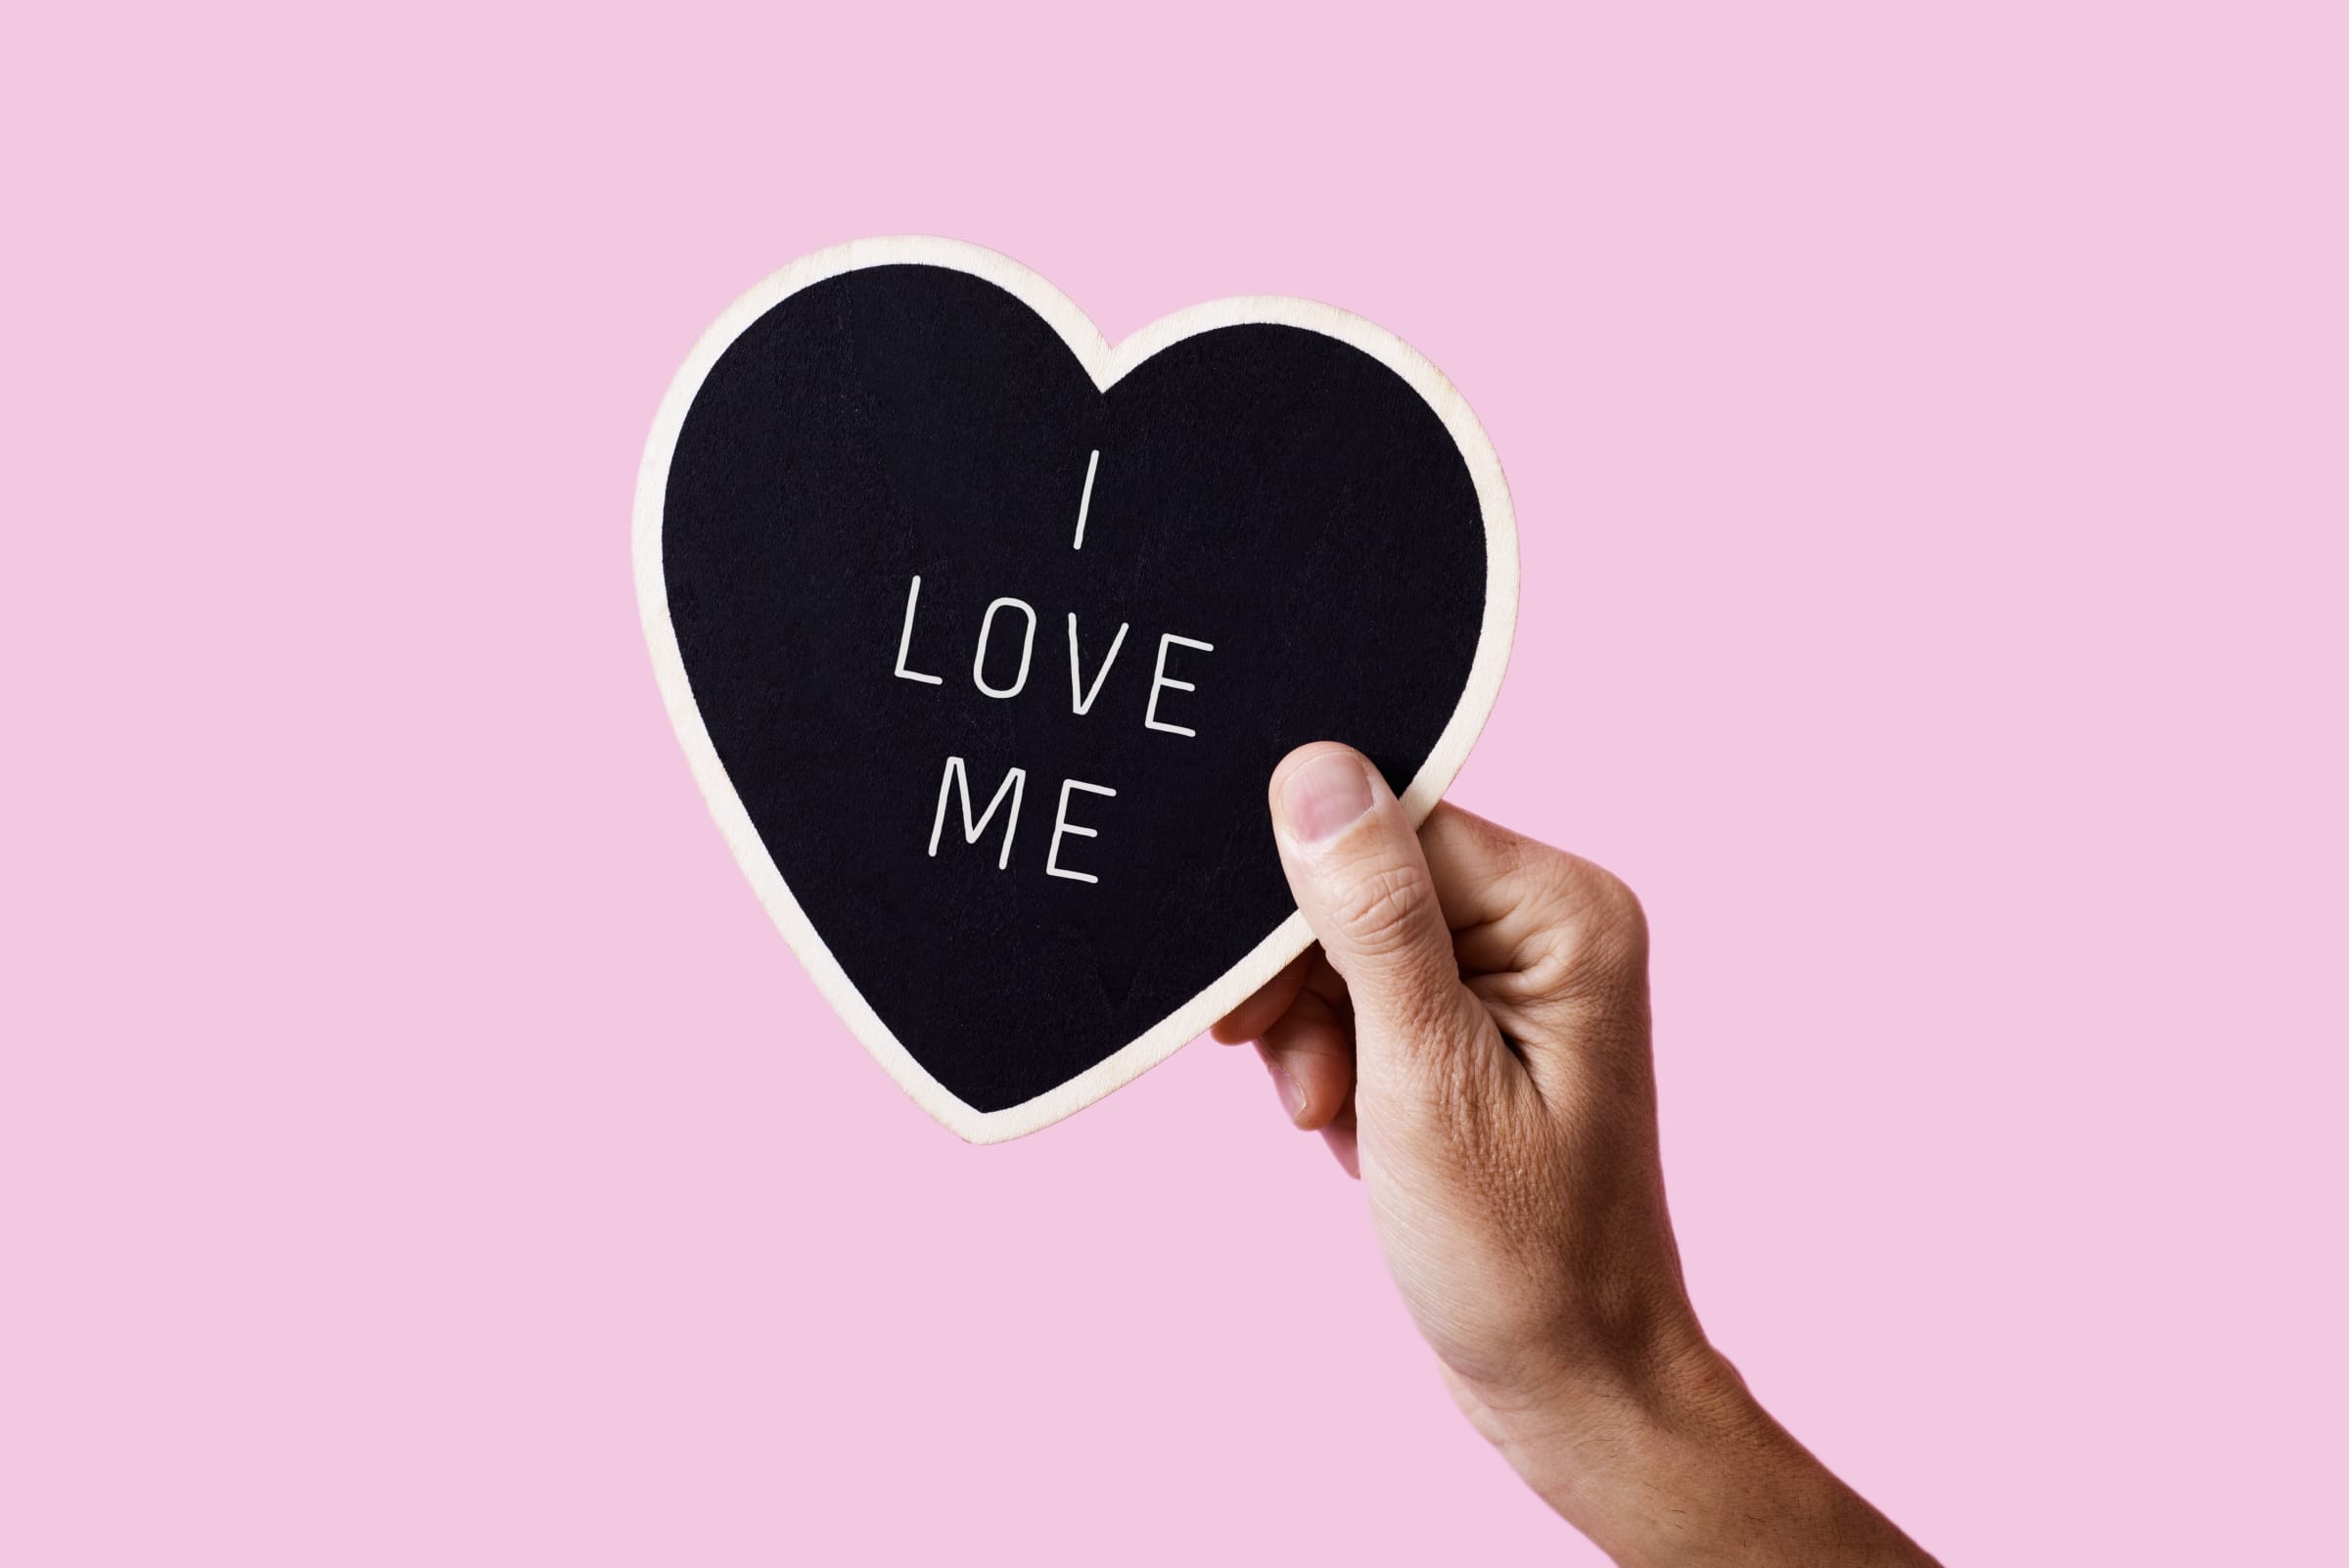 Hand holding paper heart with "I Love Me" printed on it